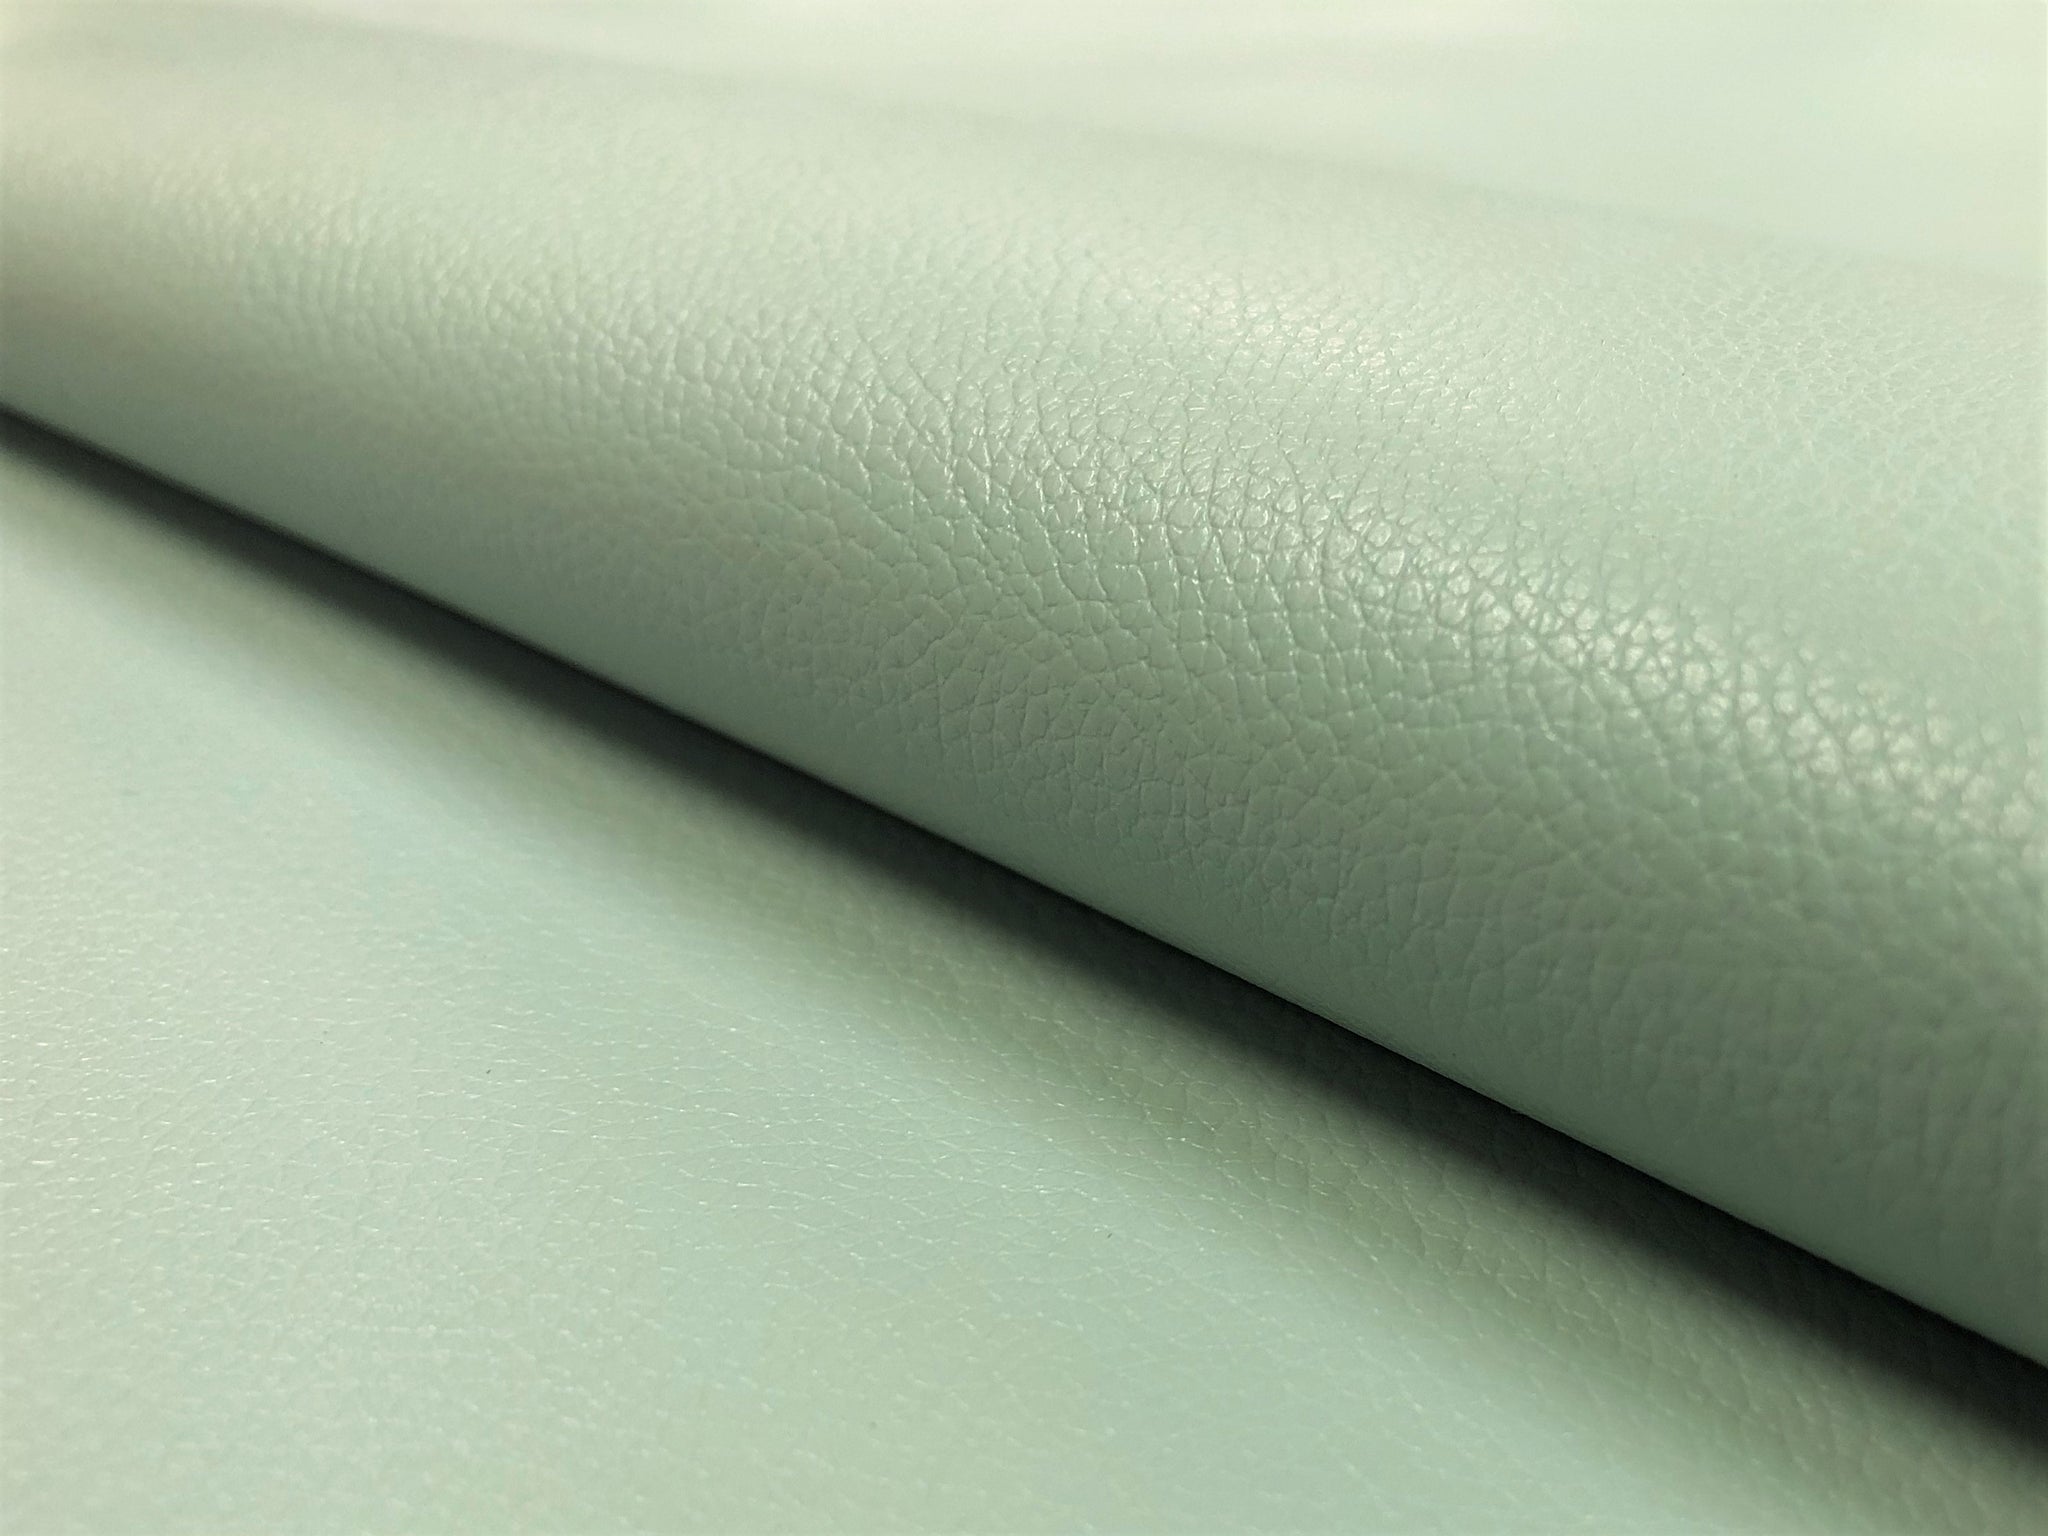 Teal Ombre ☆ Pattern Vinyl, Faux Leather